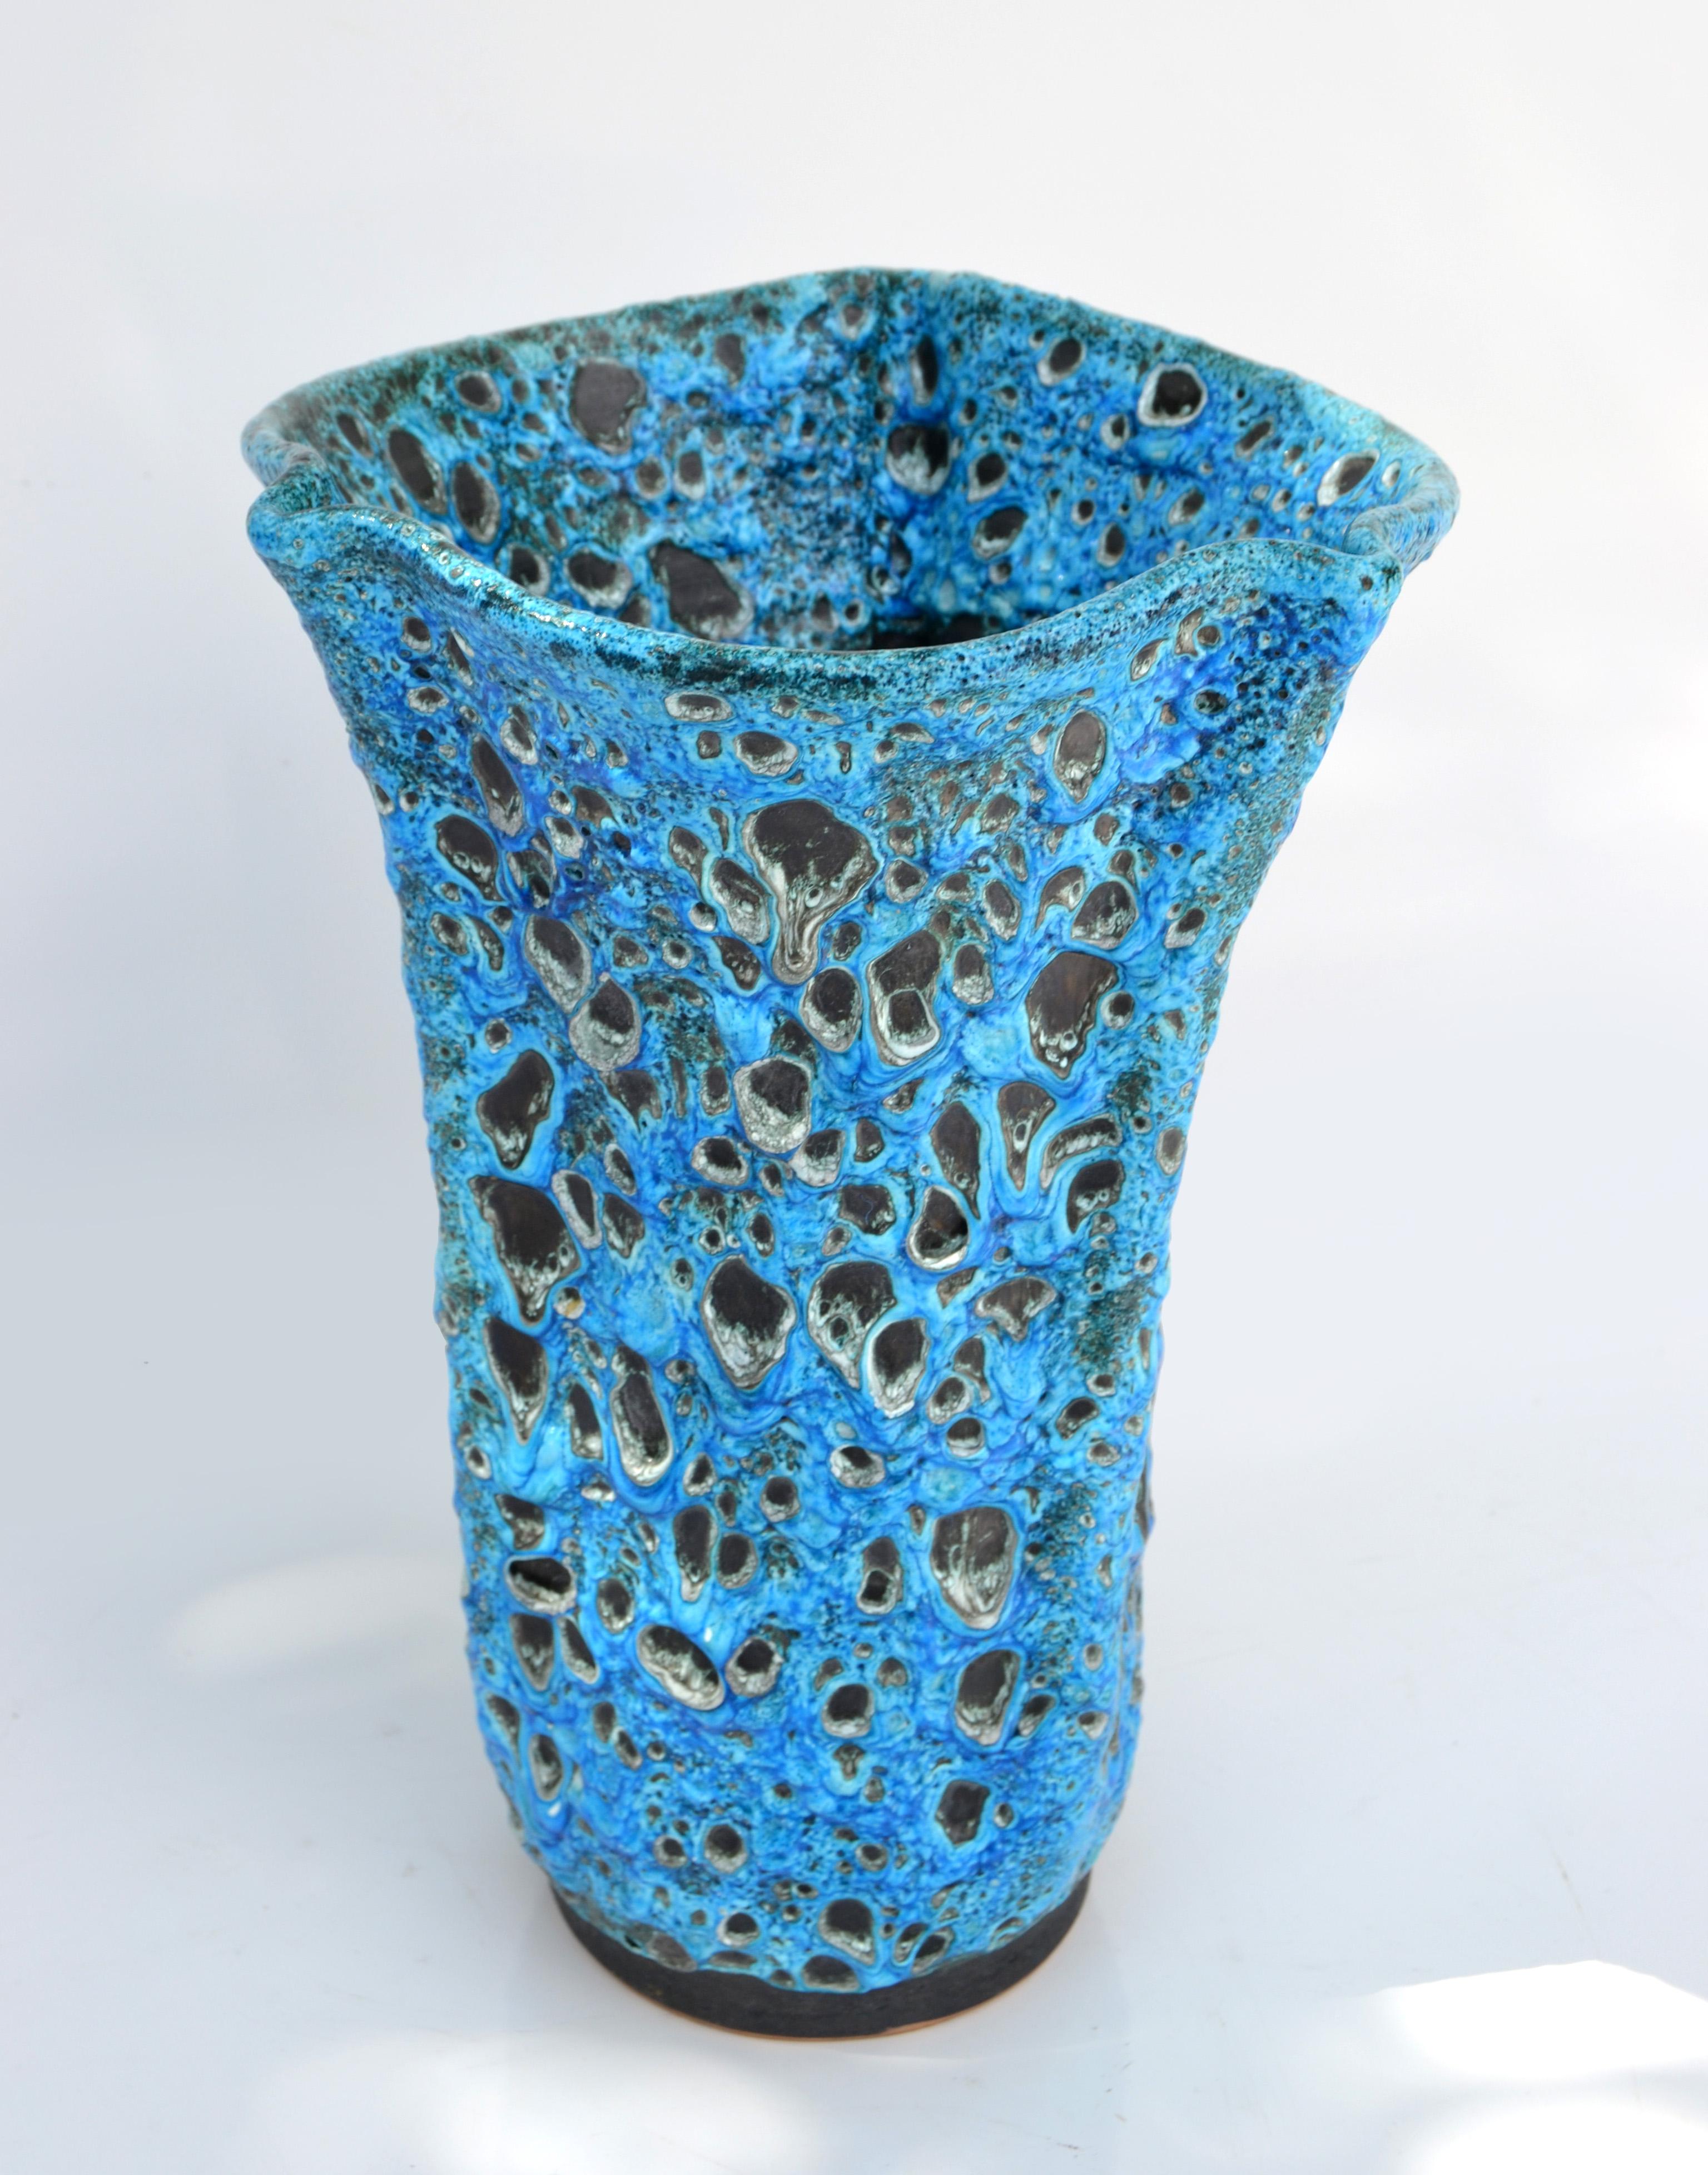 Superb Mid-Century Modern handcrafted drip glazed ceramic vase, vessel, object of Fine Art in hues of blue and black.
Signed underneath Vallauris France.
Vallauris is the famous village on the French Riviera where Picasso, Matisse, Jean Marais